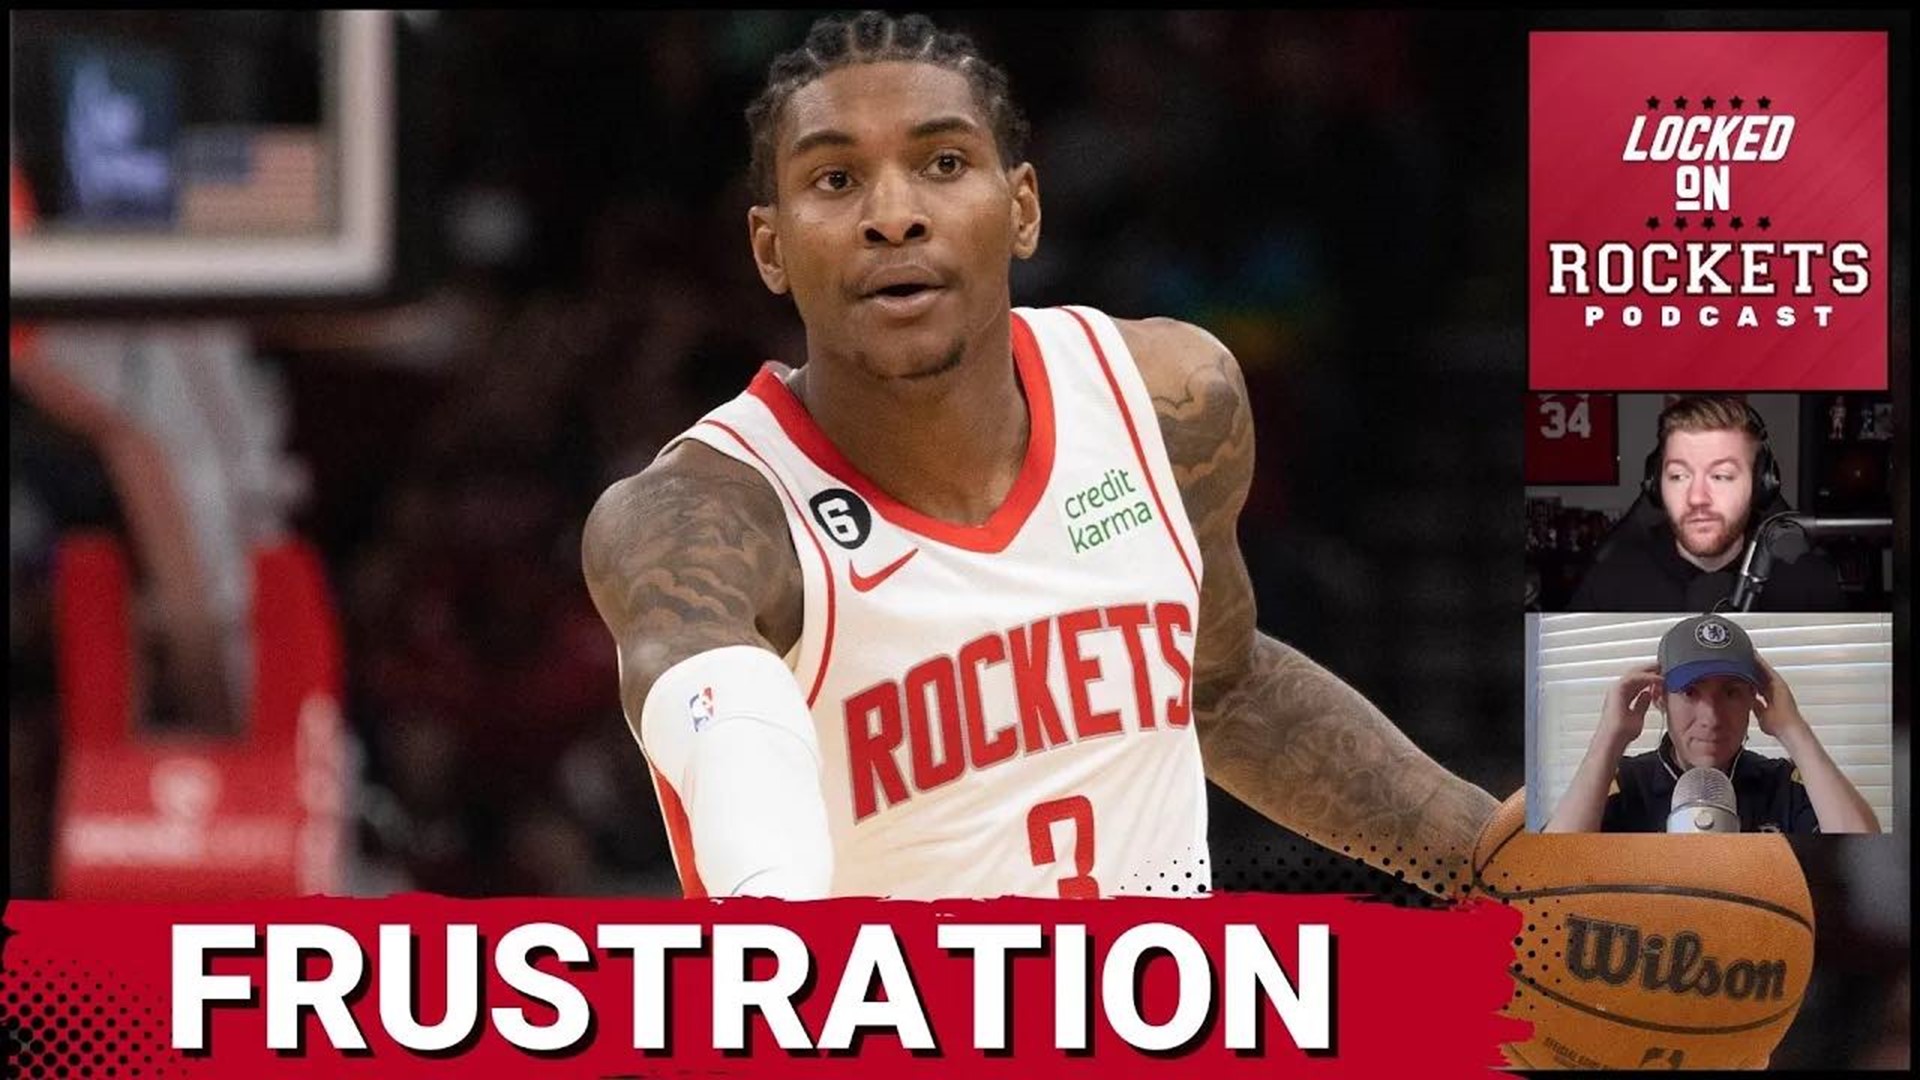 Host Jackson Gatlin is joined by weekly cohost Rockets Wire Editor Ben DuBose to discuss the Houston Rockets close loss to the Chicago Bulls.